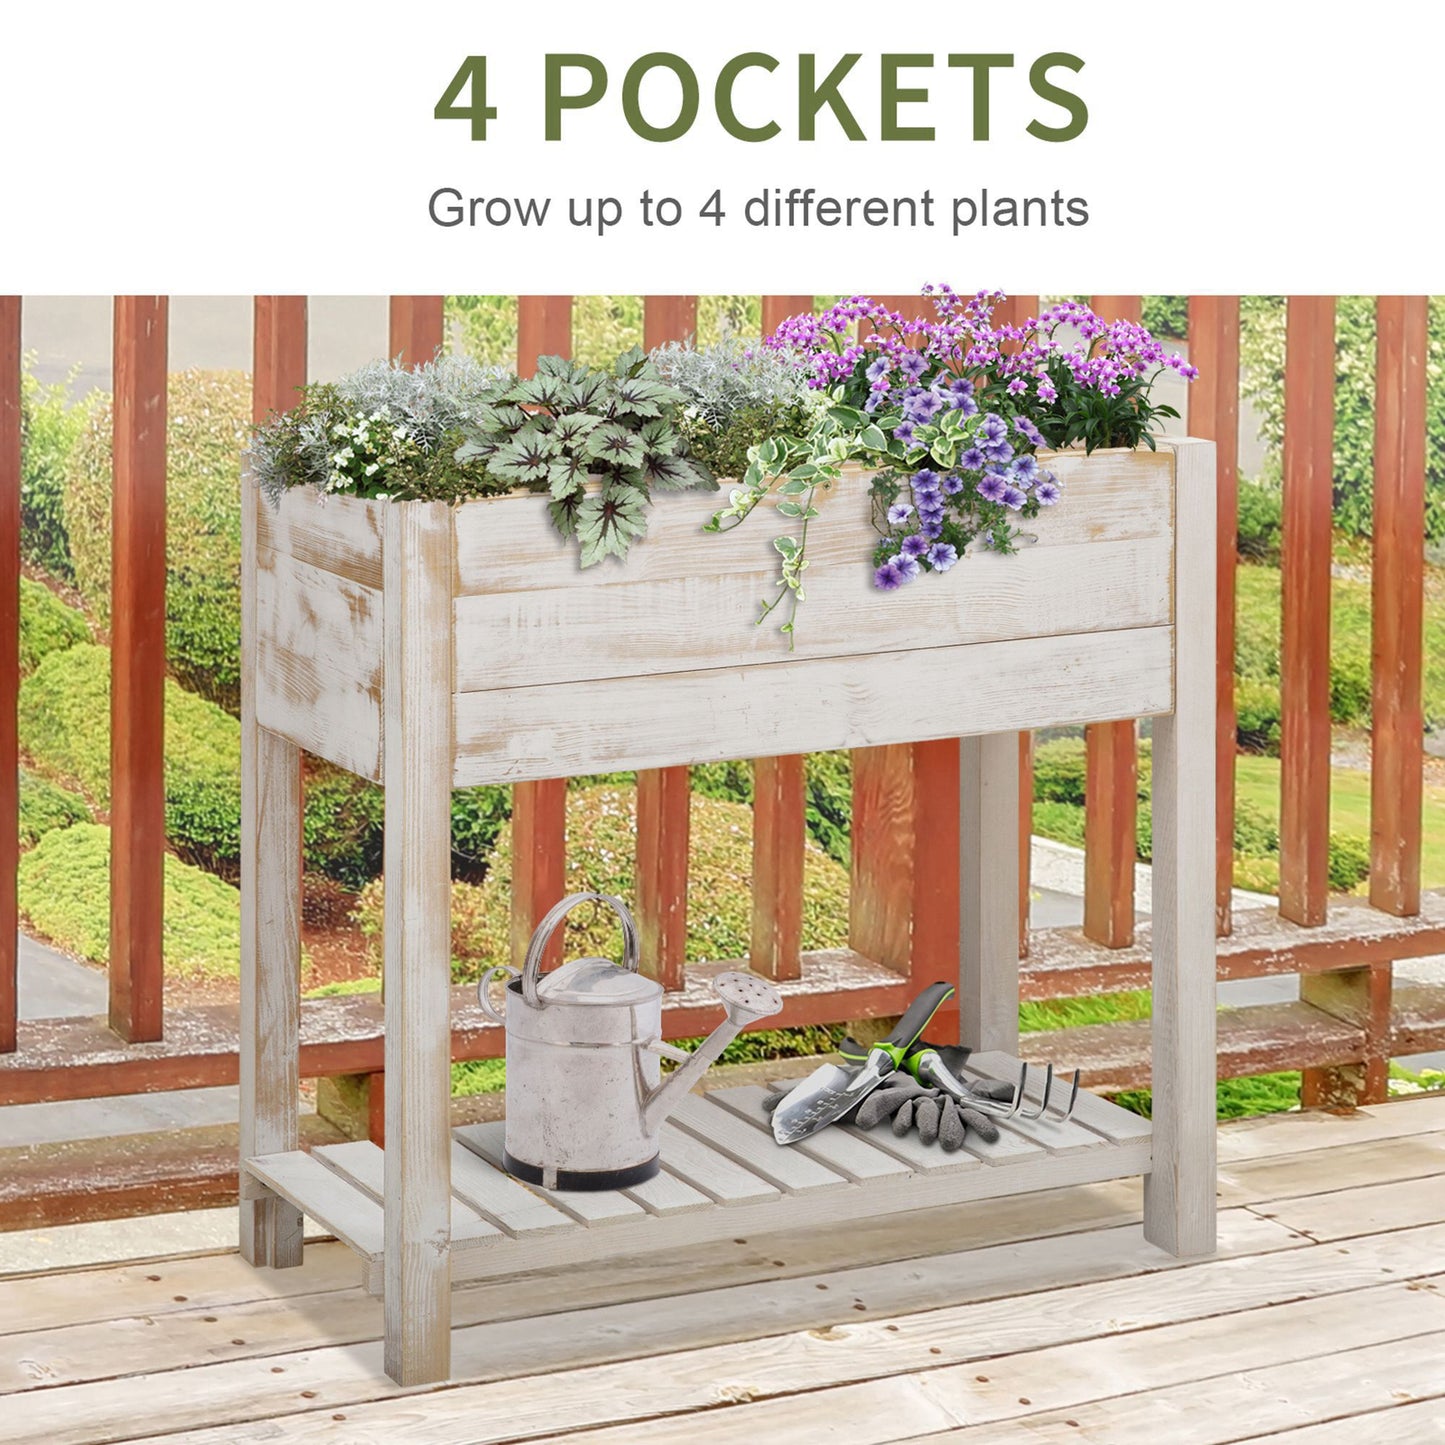 Outsunny Tiered Raised Planter: Elevated Gardening Bed with Pockets for Veggies, Flowers & Herbs, White